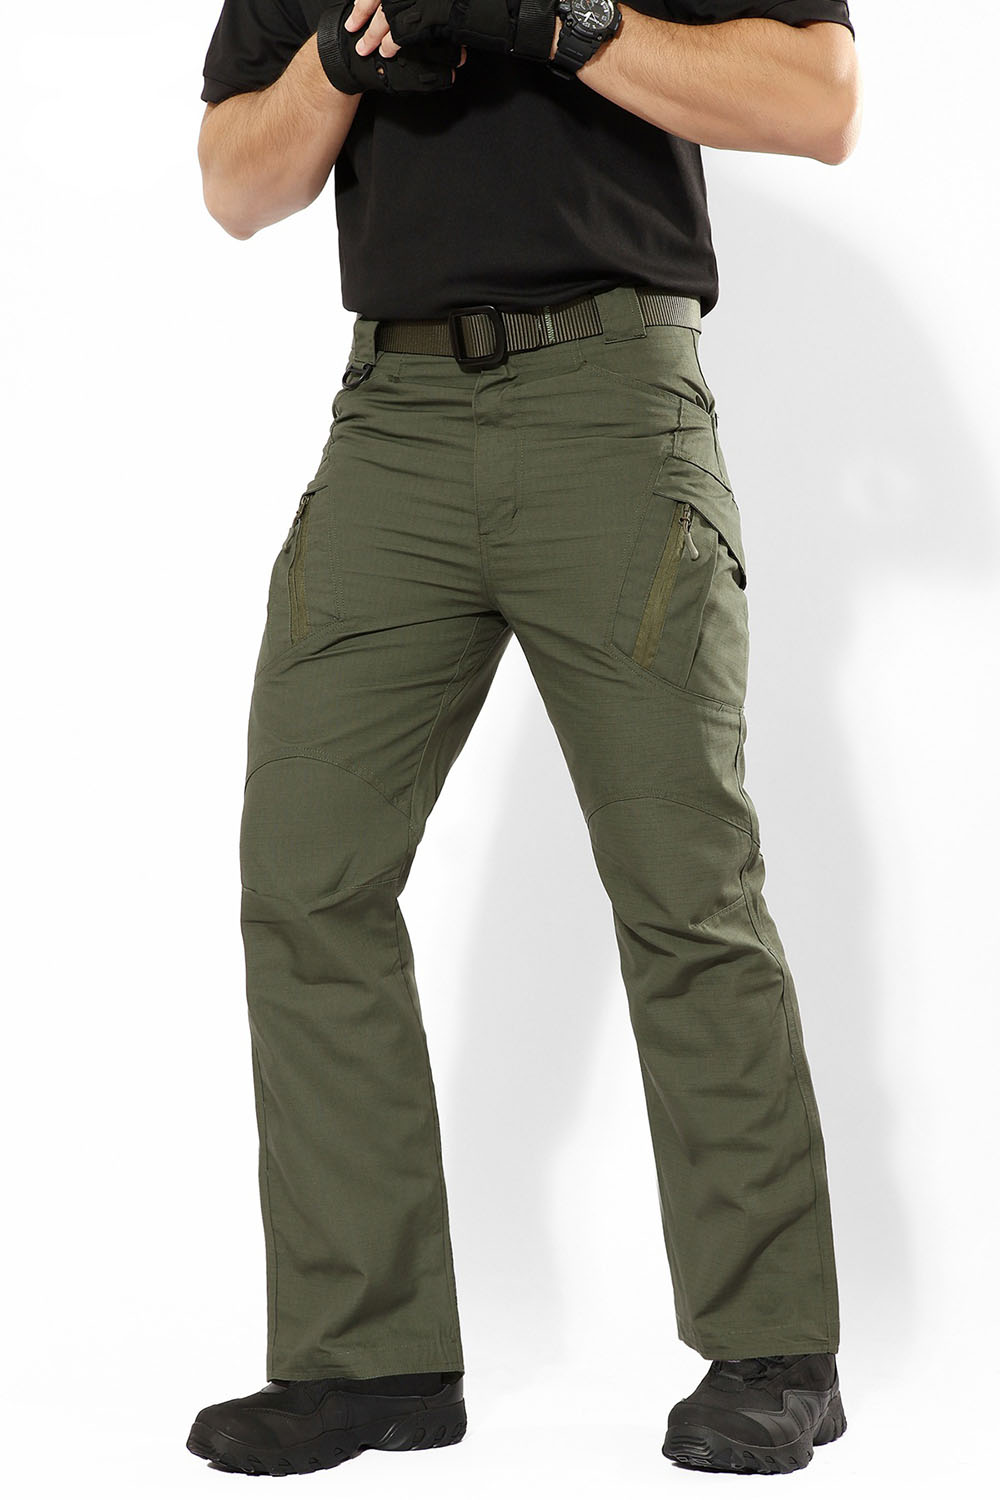 MEGE Brand Men's Clothing Military Army Combat Cargo Pants Tactical ...